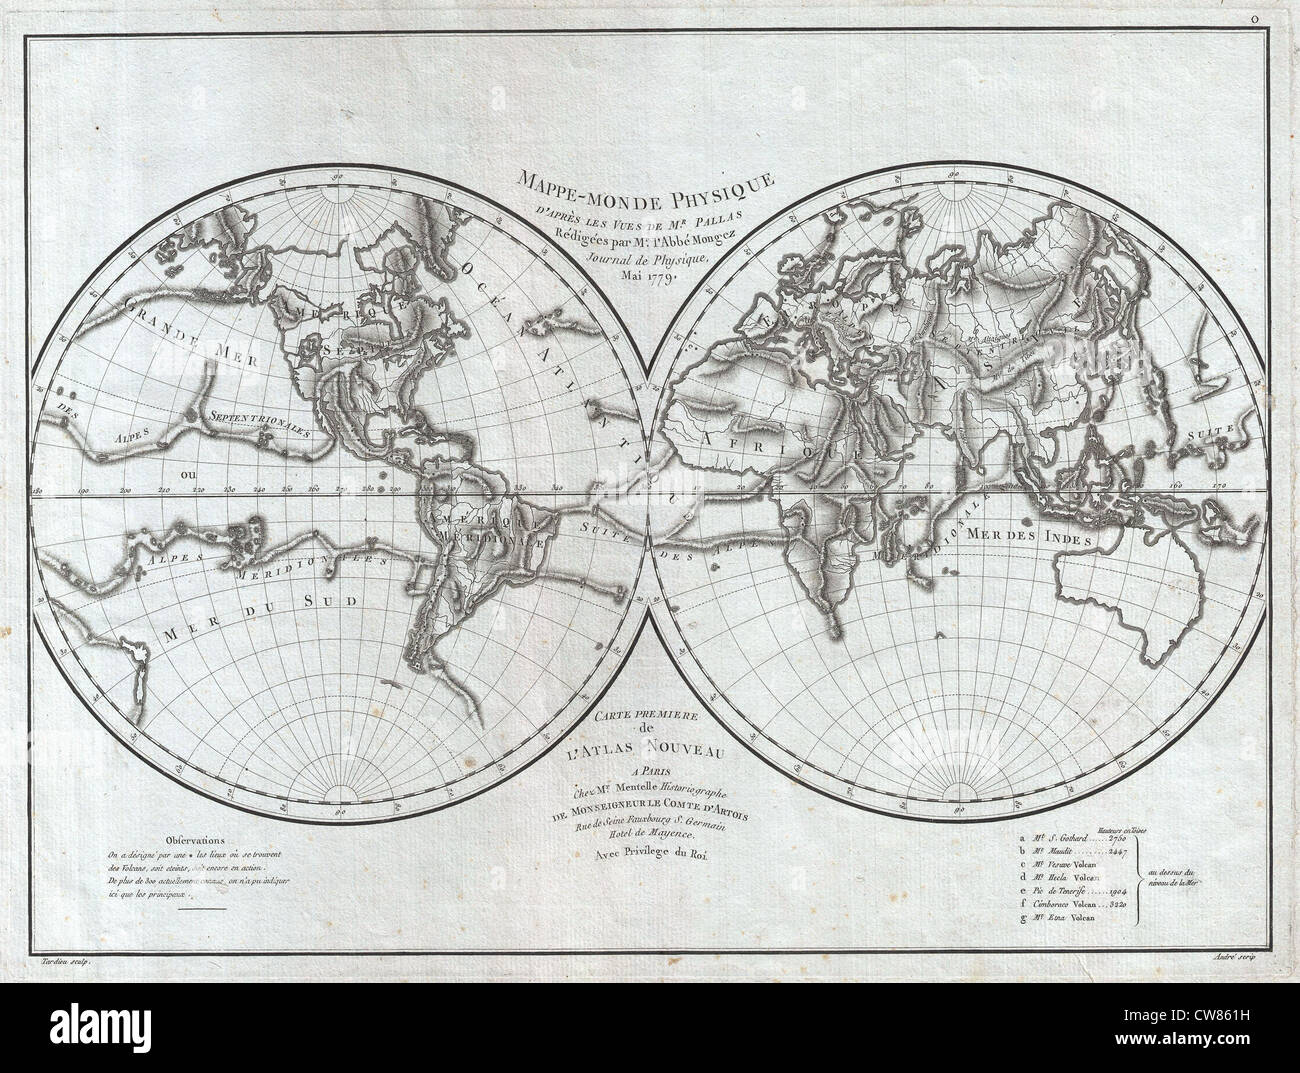 1779 Pallas and Mentelle Map of the Physical World Stock Photo